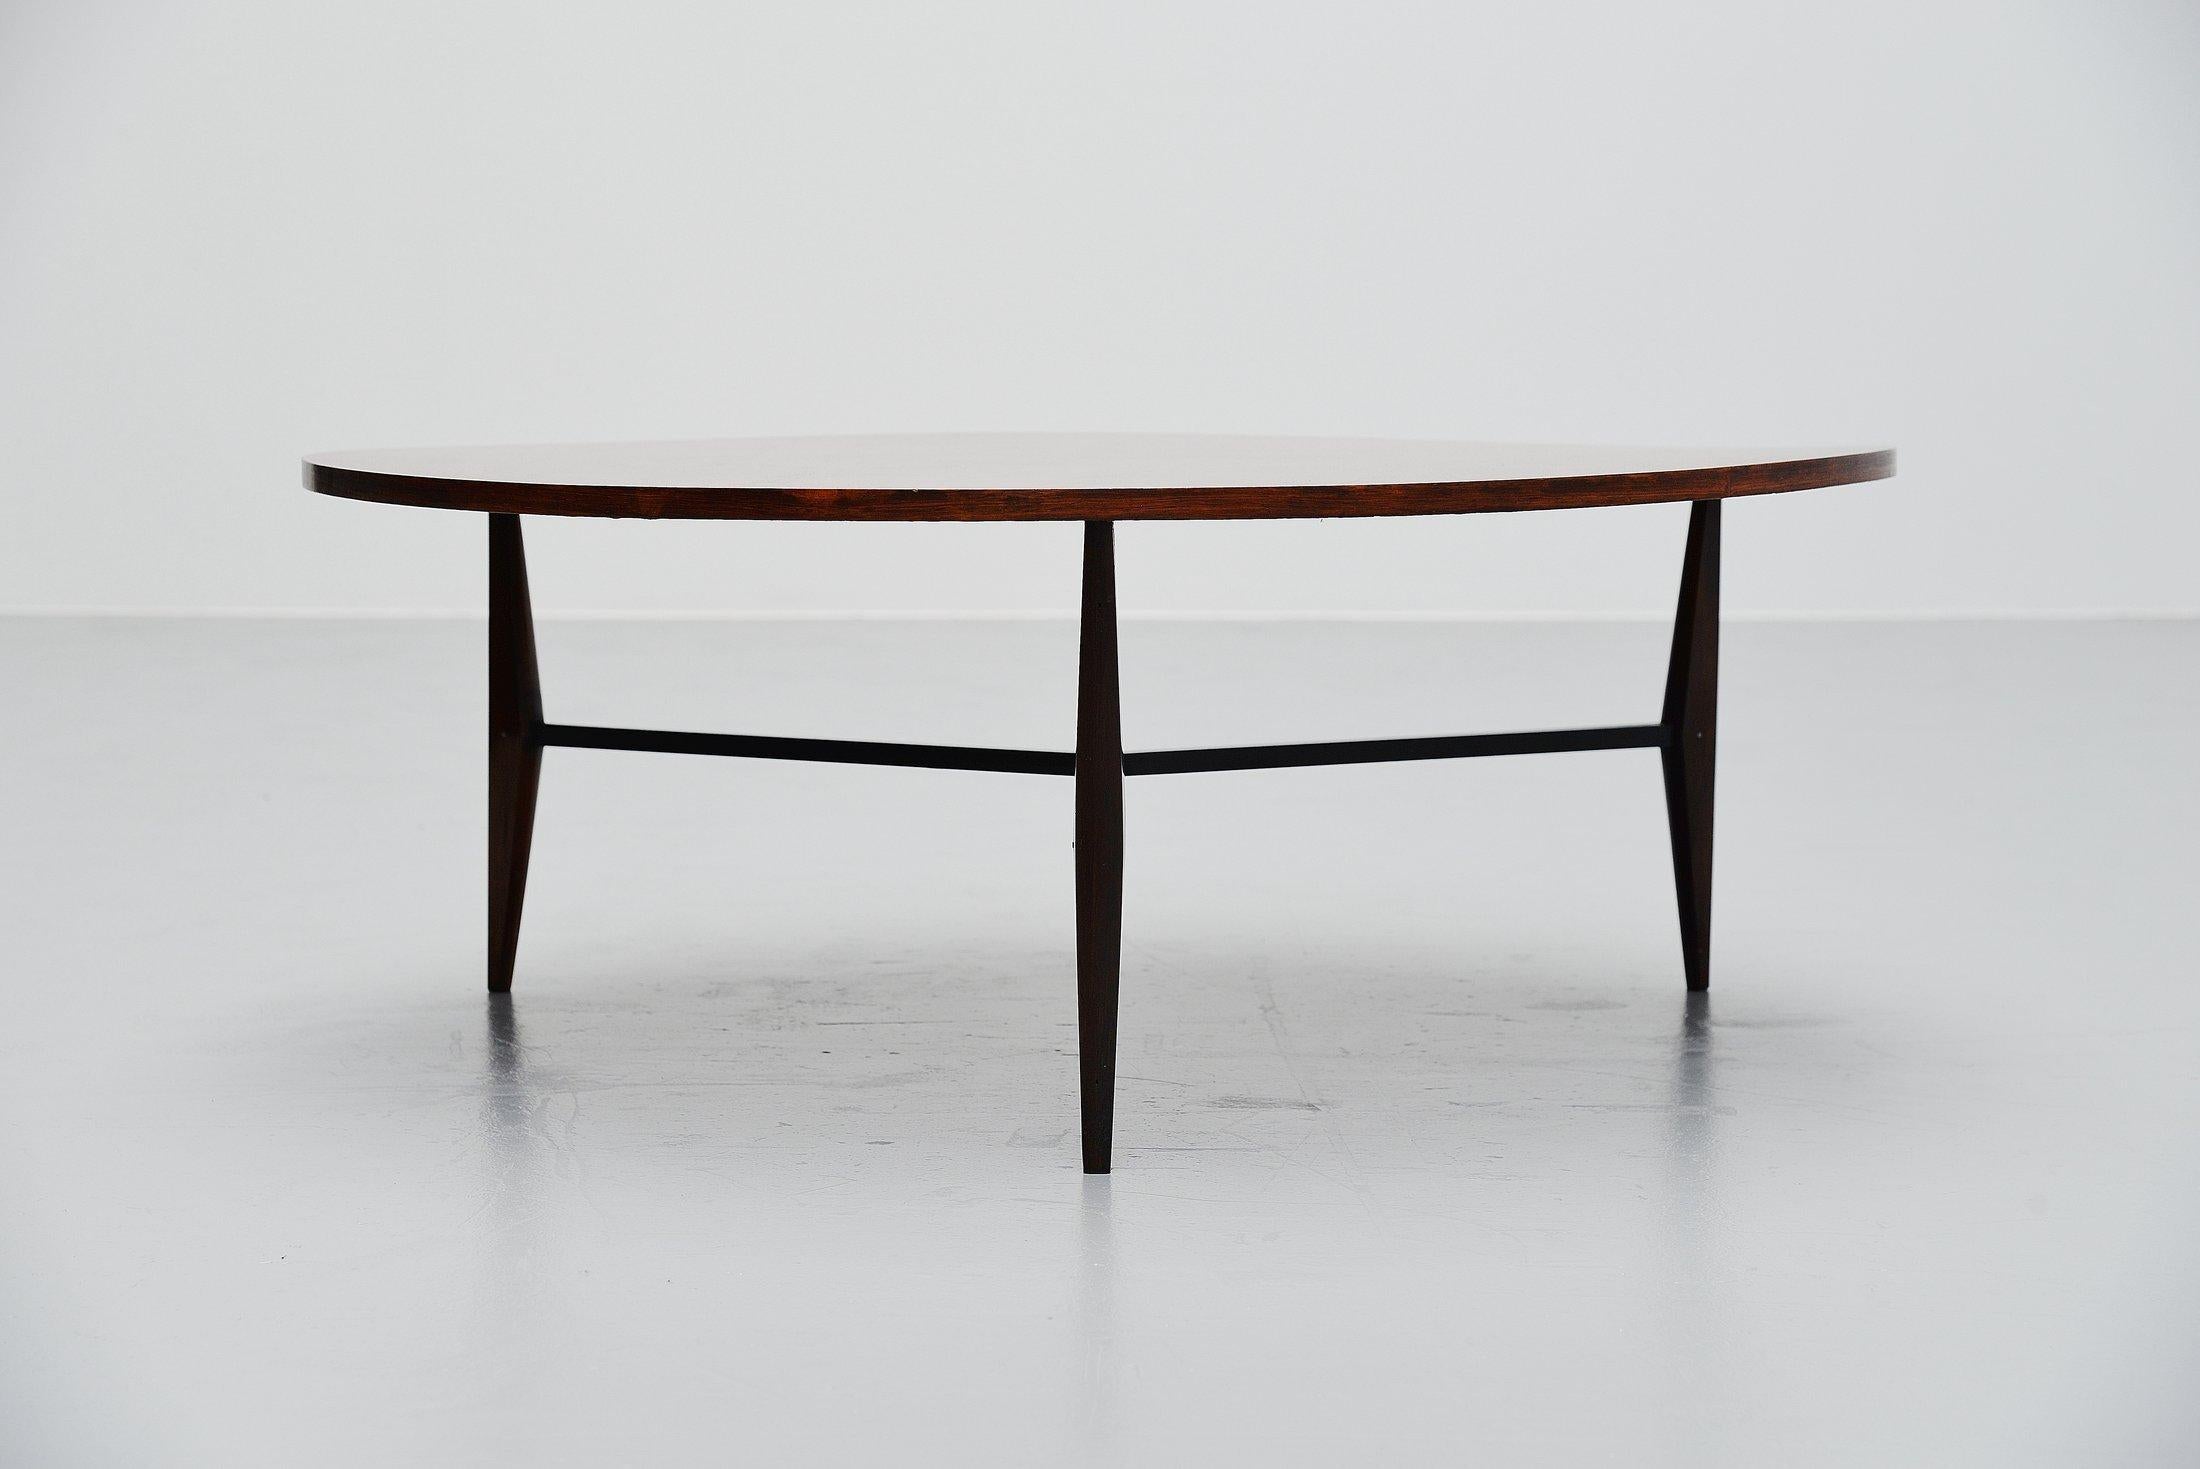 Rare model 401 coffee table designed by Harry Bertoia and manufactured by Knoll International, United States 1952. This rare rosewood coffee table was a very early design by Bertoia. The table has solid rosewood legs and a rosewood veneer, round